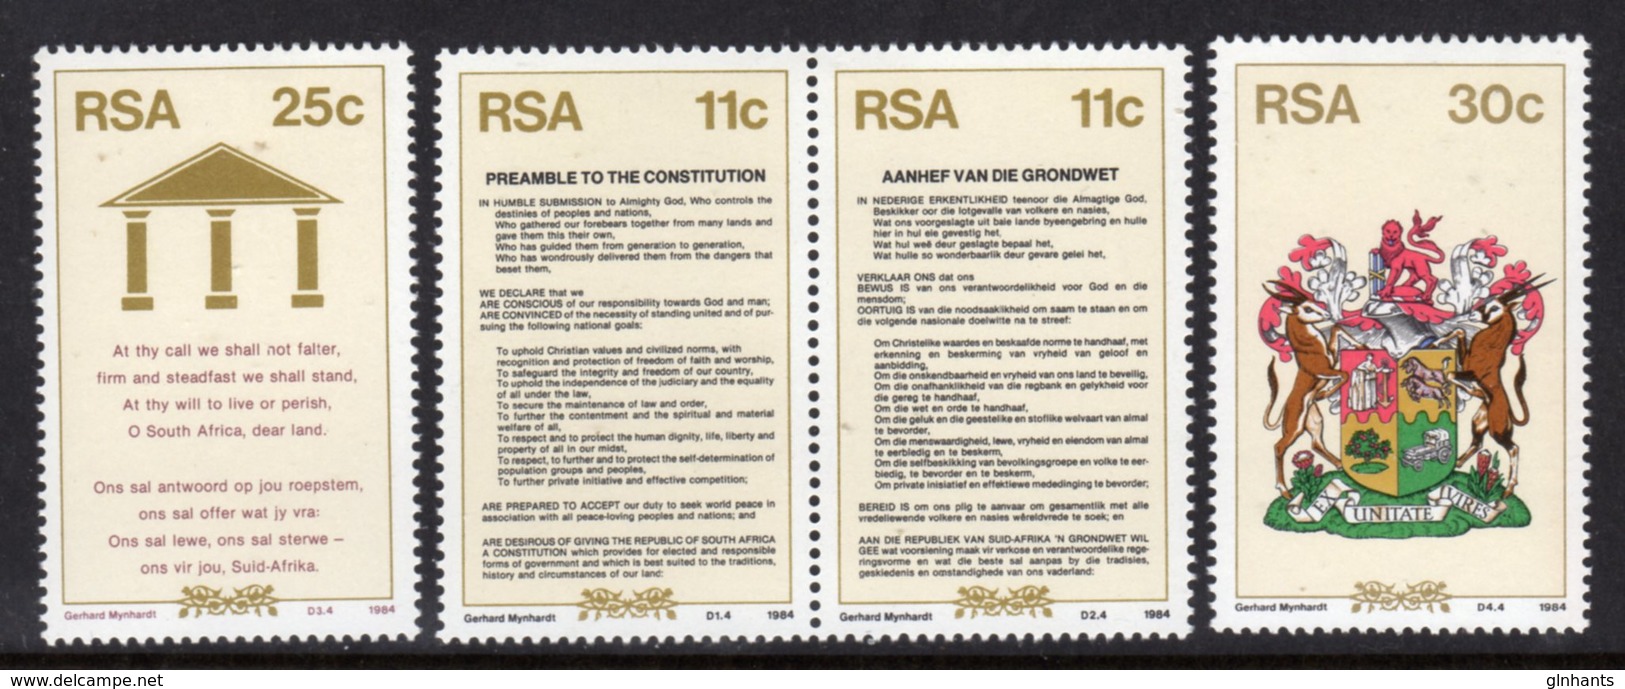 SOUTH AFRICA - 1984 NEW CONSTITUTION SET (4V) FINE MOUNTED MINT MM * SG 566-569 - Unused Stamps